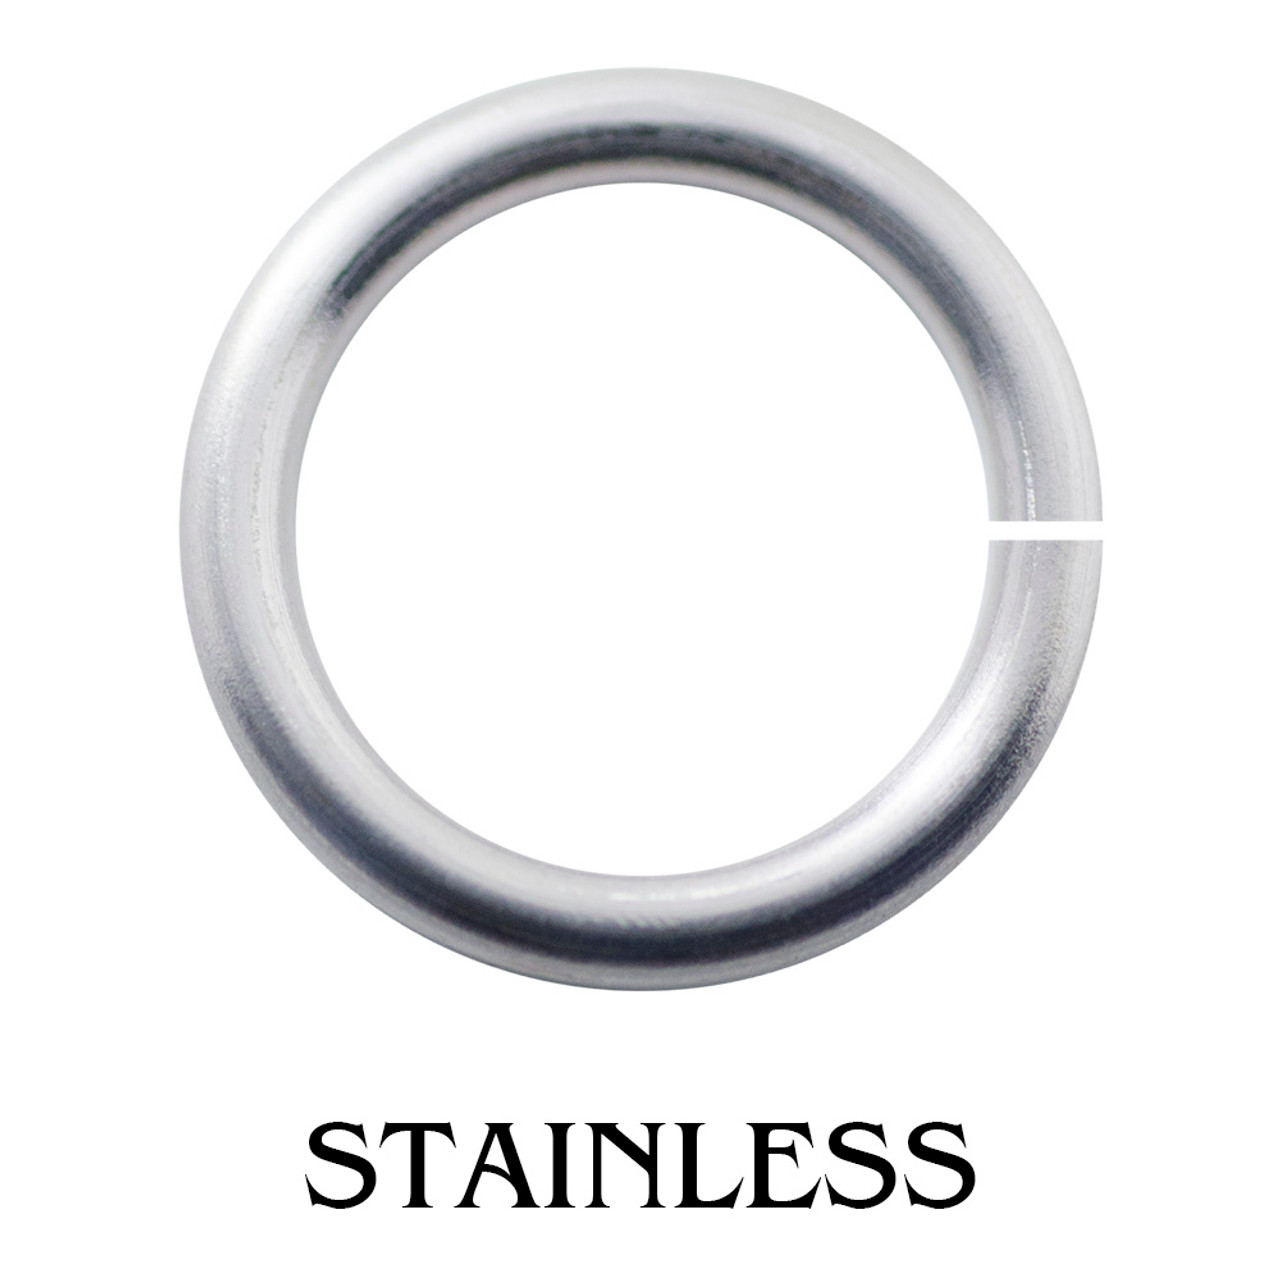 Stainless Steel Gold Plated Saw Cut Jump Rings 100 Pack